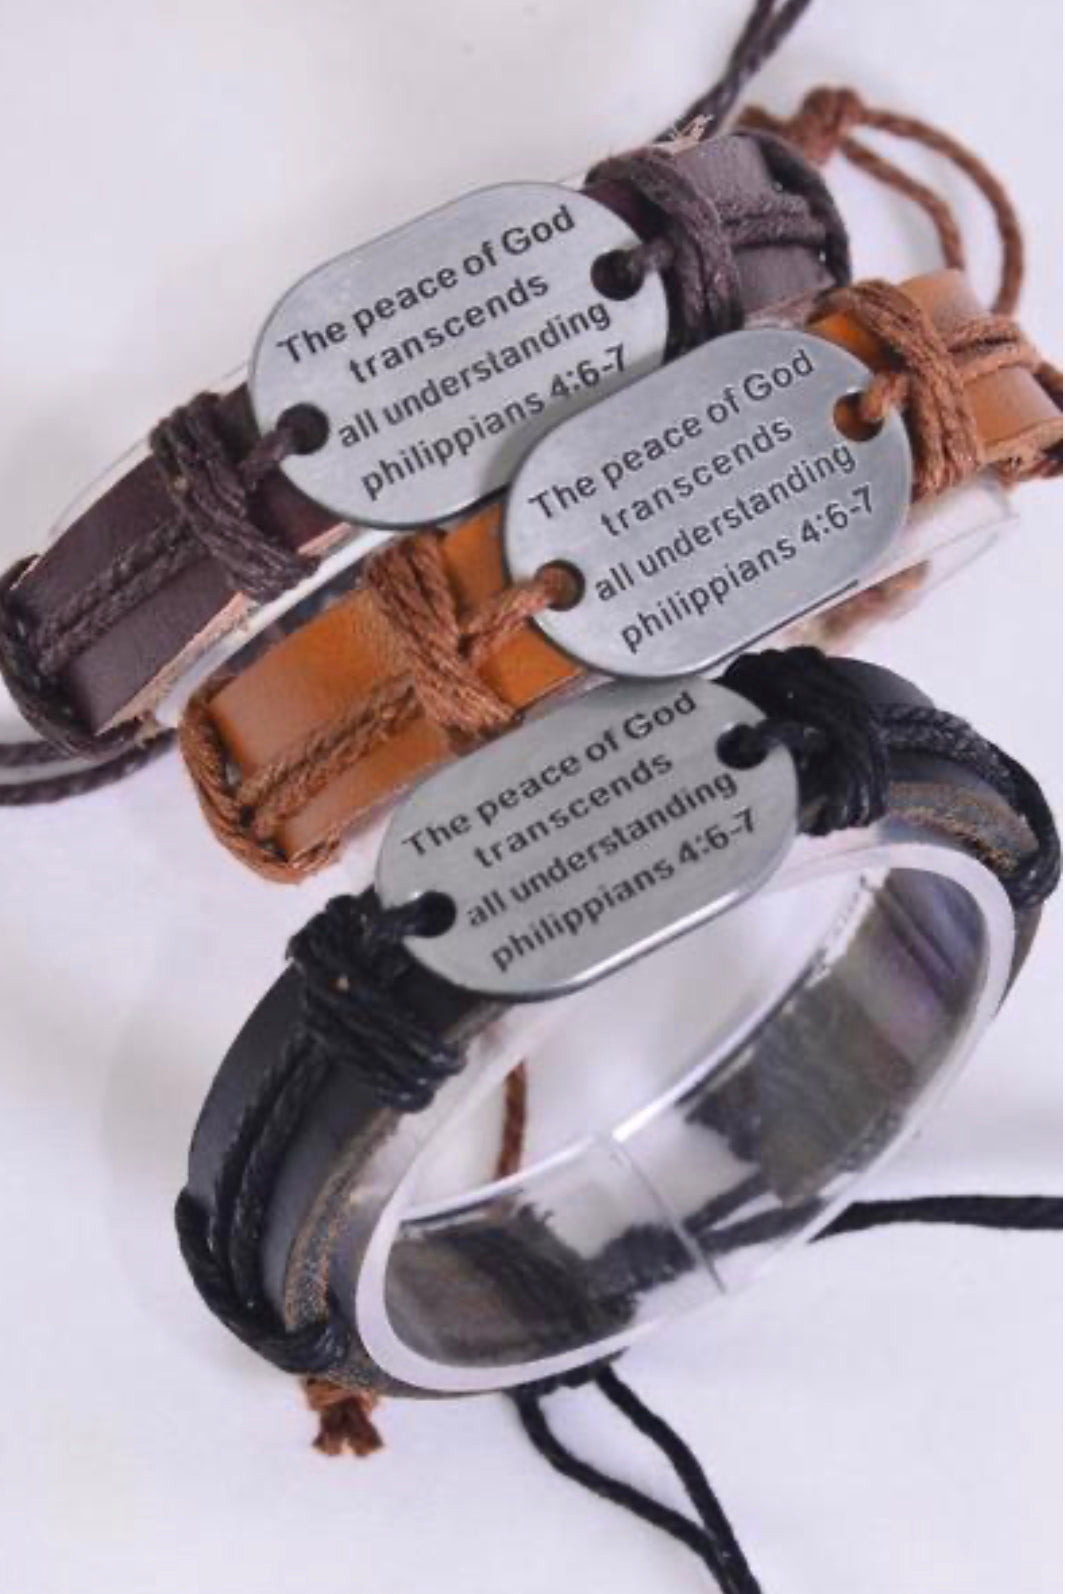 Bracelet Real Leather Band The peace of God transcends all understanding - Heather's Heavenly Boutique